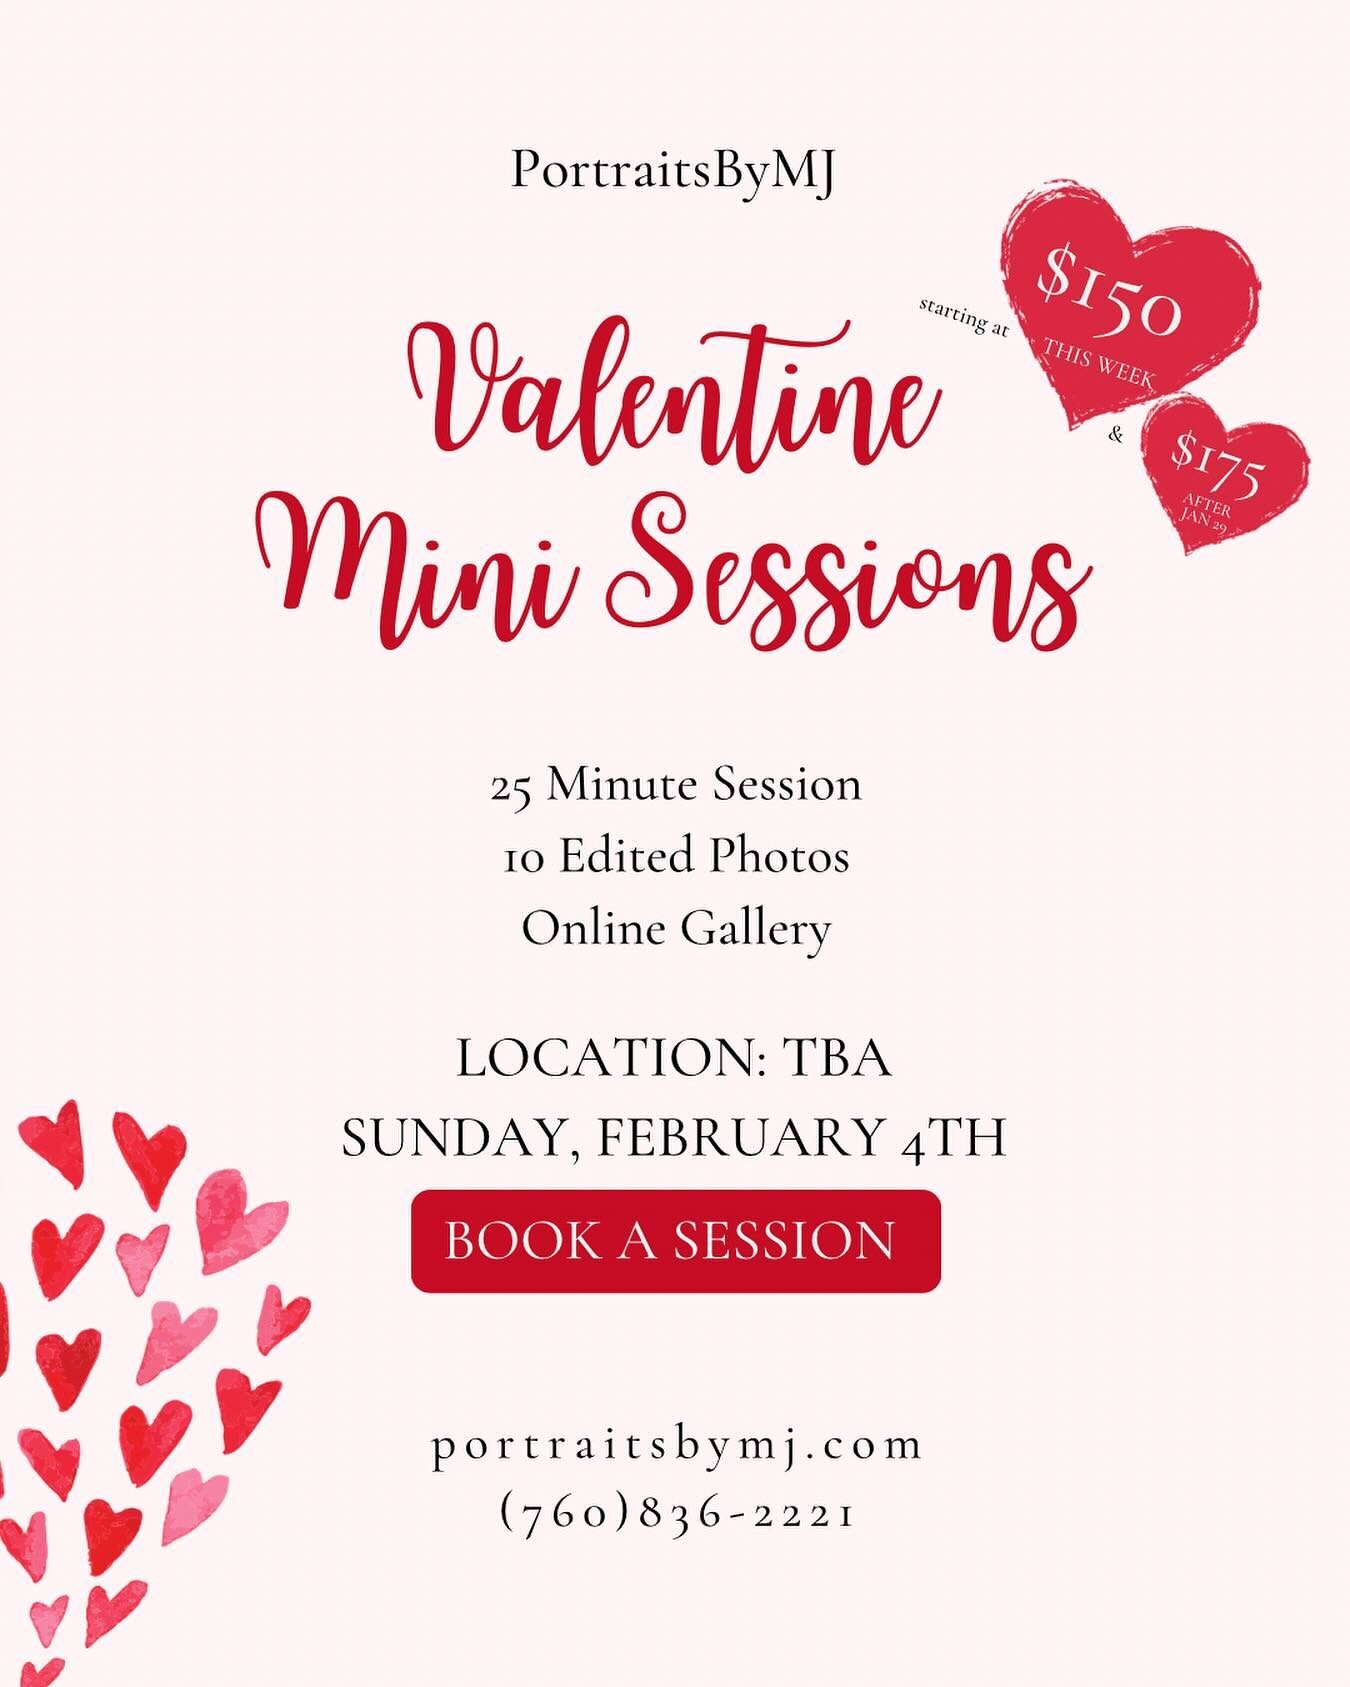 Valentine&rsquo;s Mini Sessions! Book Now, Link in Bio ❤️

Special Offer: 
✧ Book January 19th-21st &amp; get $25 off your mini session

-

✧$50 non-refundable deposit required
✧ Prices go up to $175 after January 29th
✧ Giveaway will take place on J